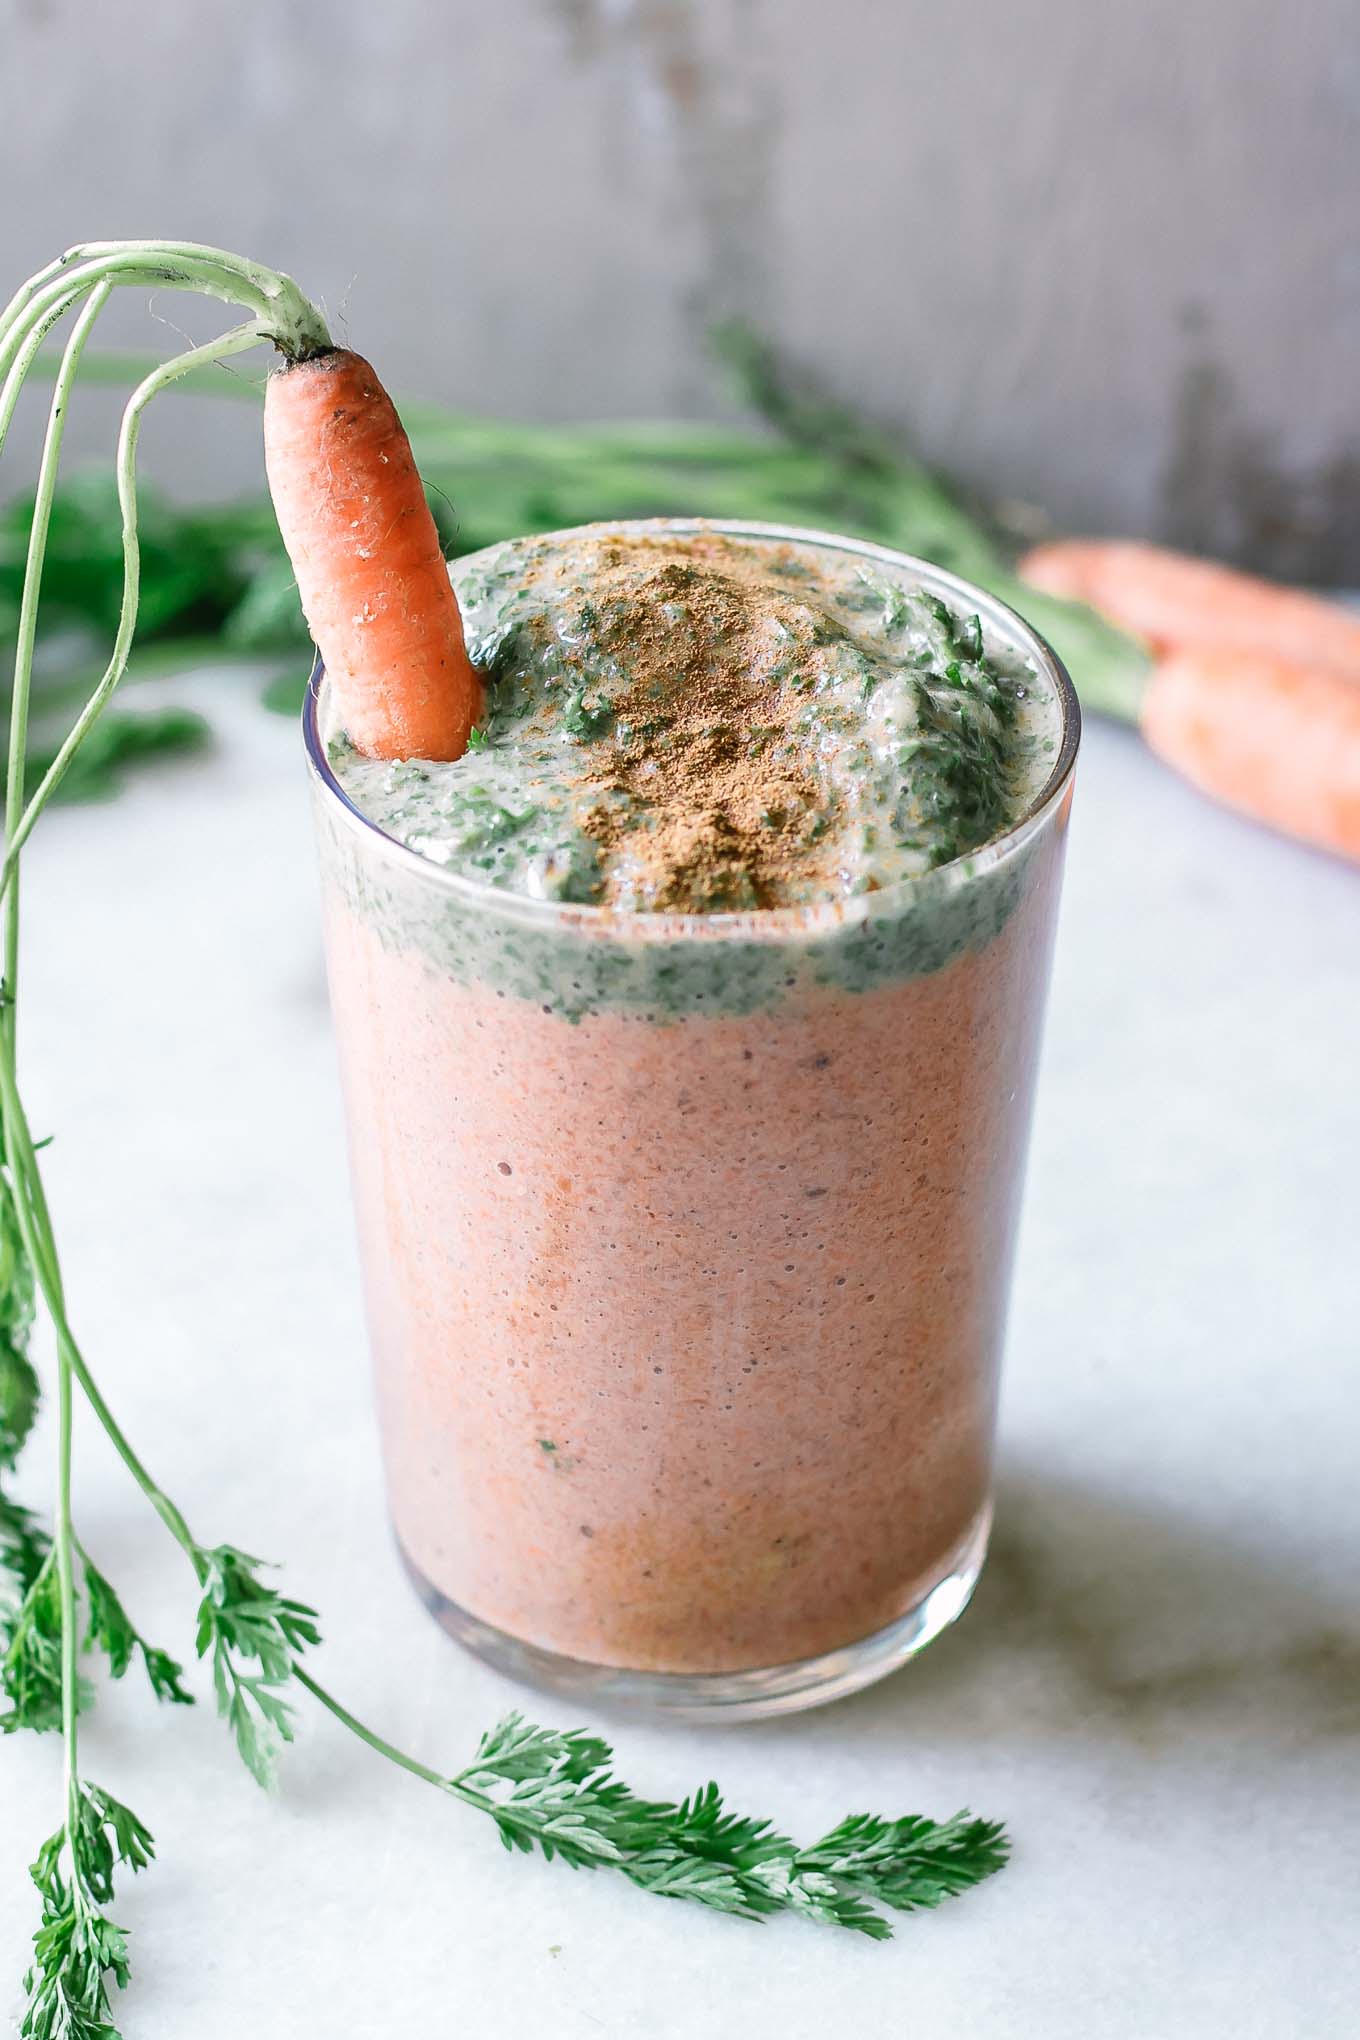 an orange carrot smoothie with green carrot greens as garnish on a white table